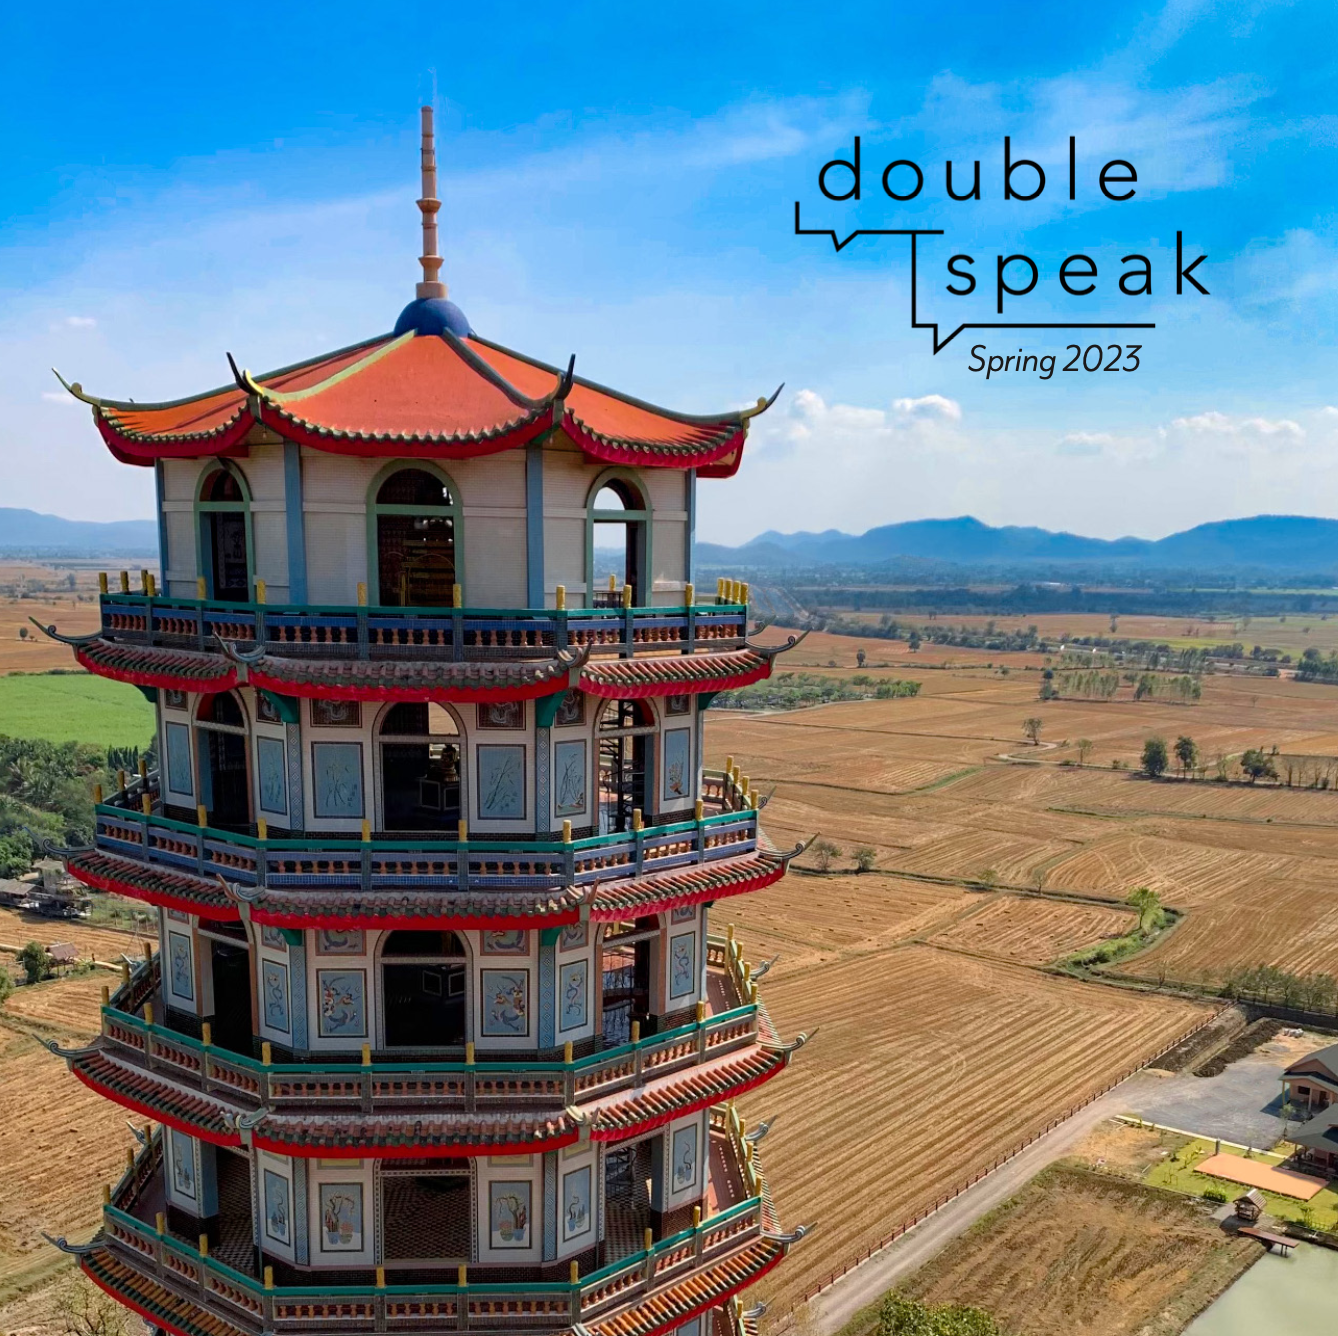 Click here to go to the latest issue of DoubleSpeak.